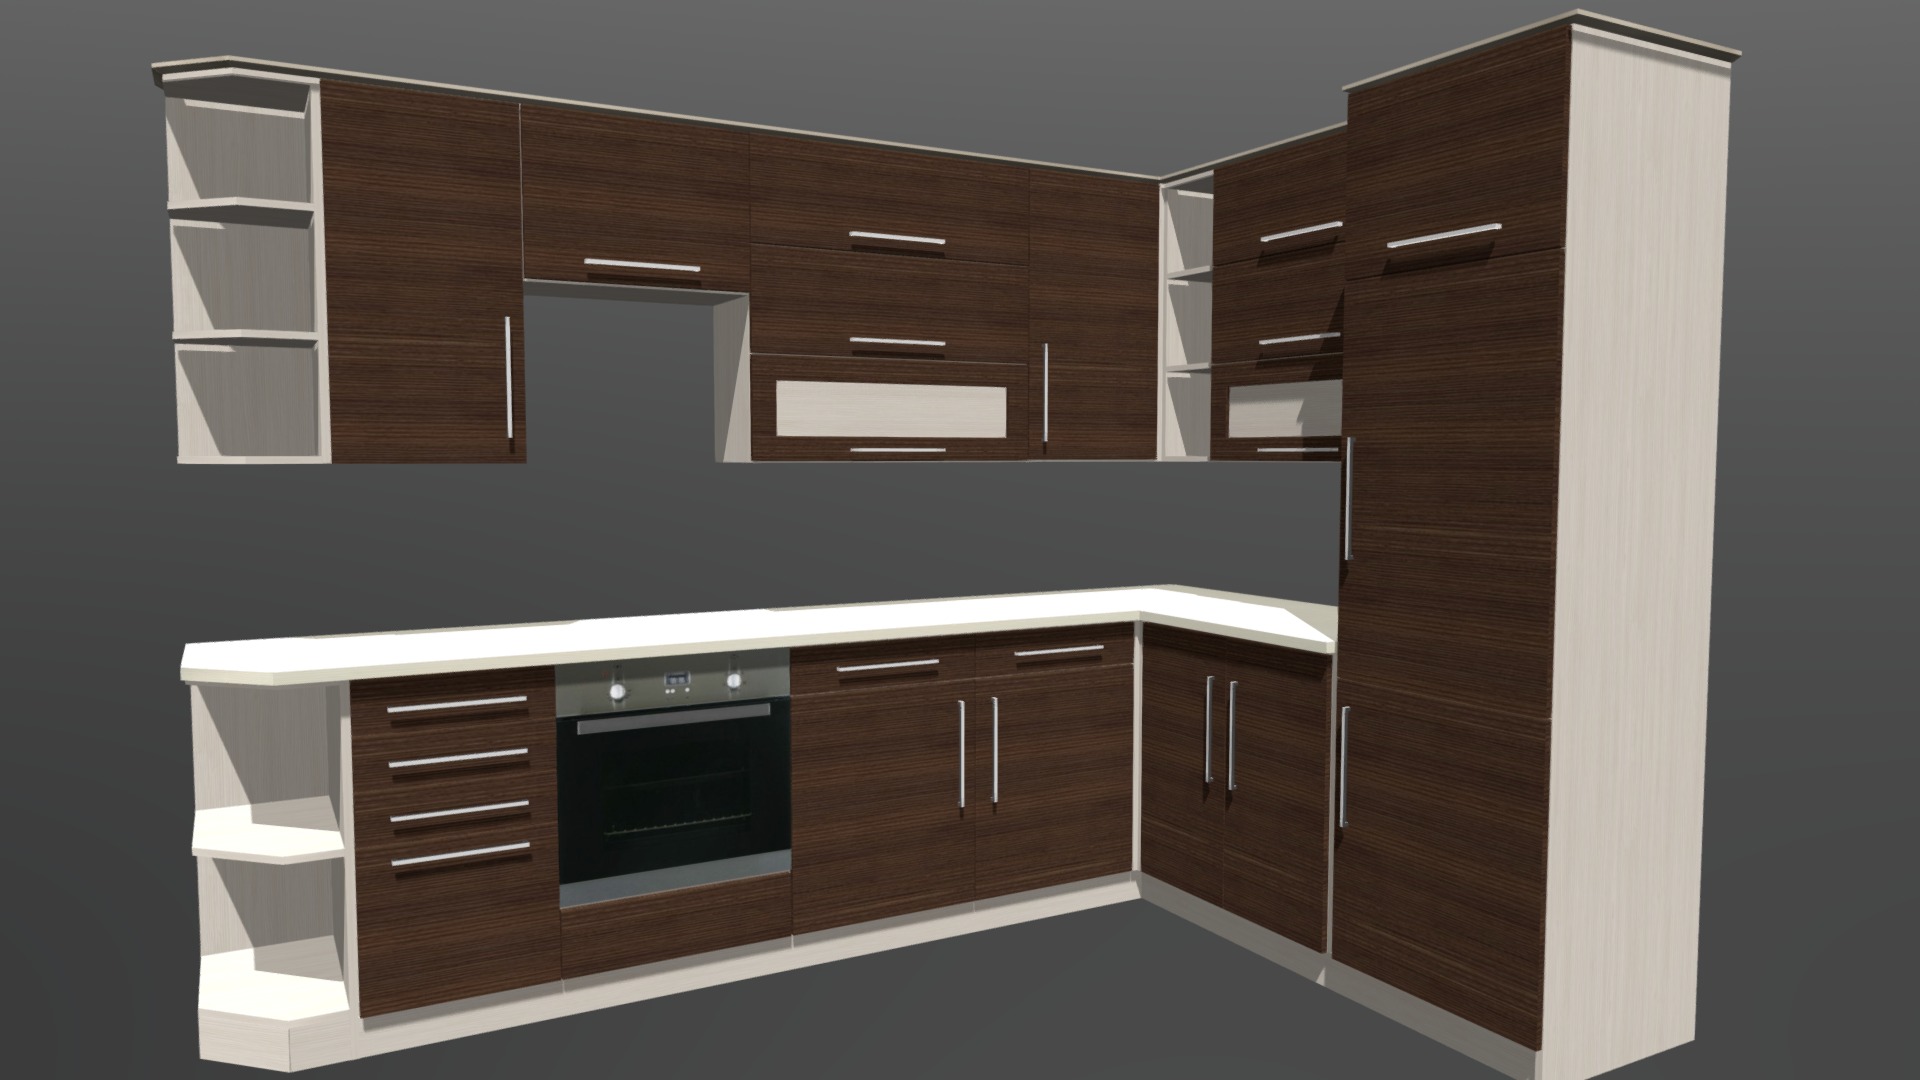 3D model Kitchen cabinet 2 - This is a 3D model of the Kitchen cabinet 2. The 3D model is about a kitchen with a black cabinet.